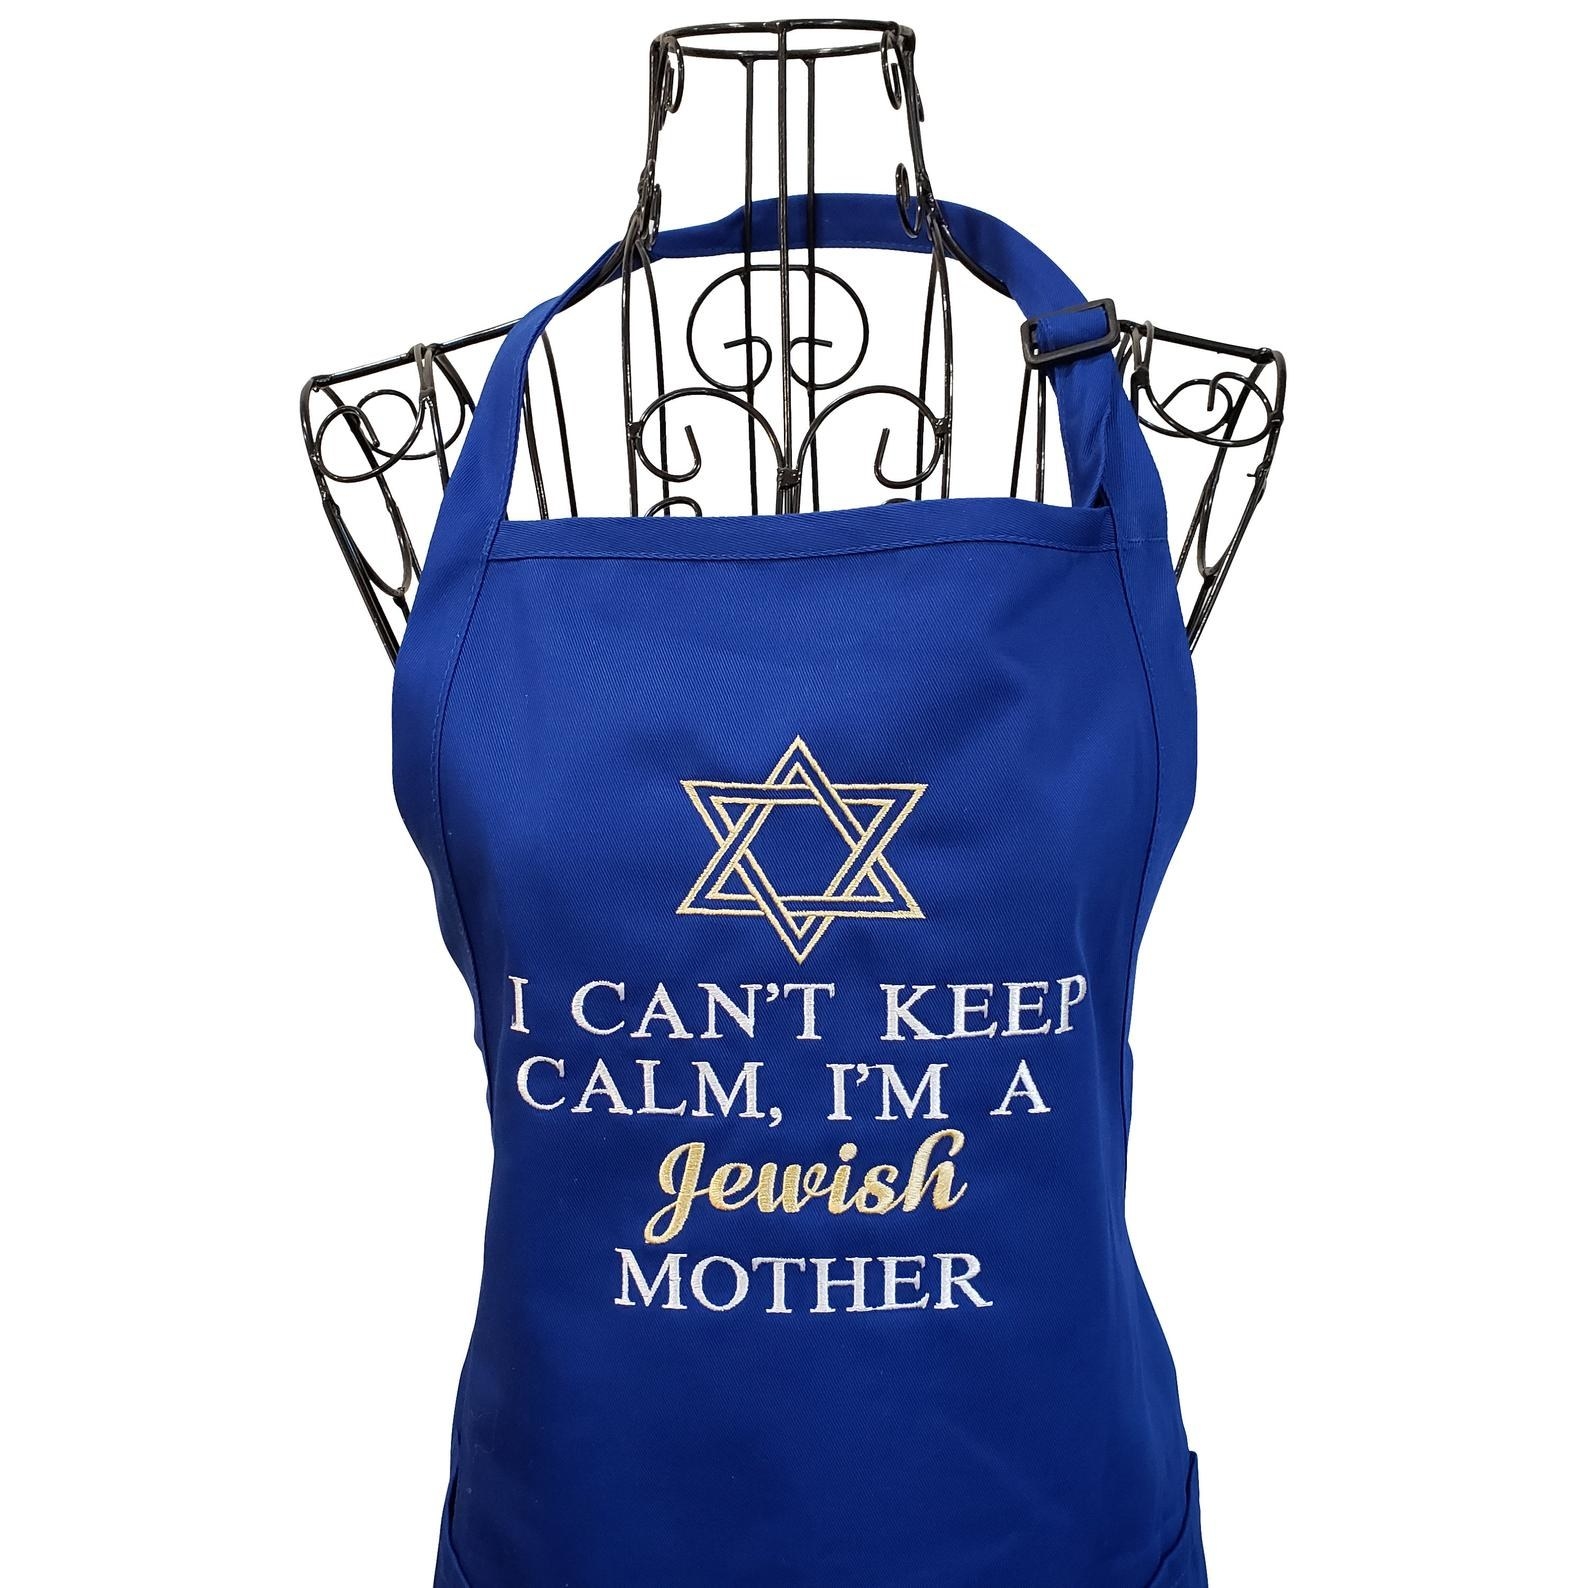 the blue apron with a star of david printed on it and white and gold text that reads &quot;I can&#x27;t keep calm, i&#x27;m a jewish mother&quot;